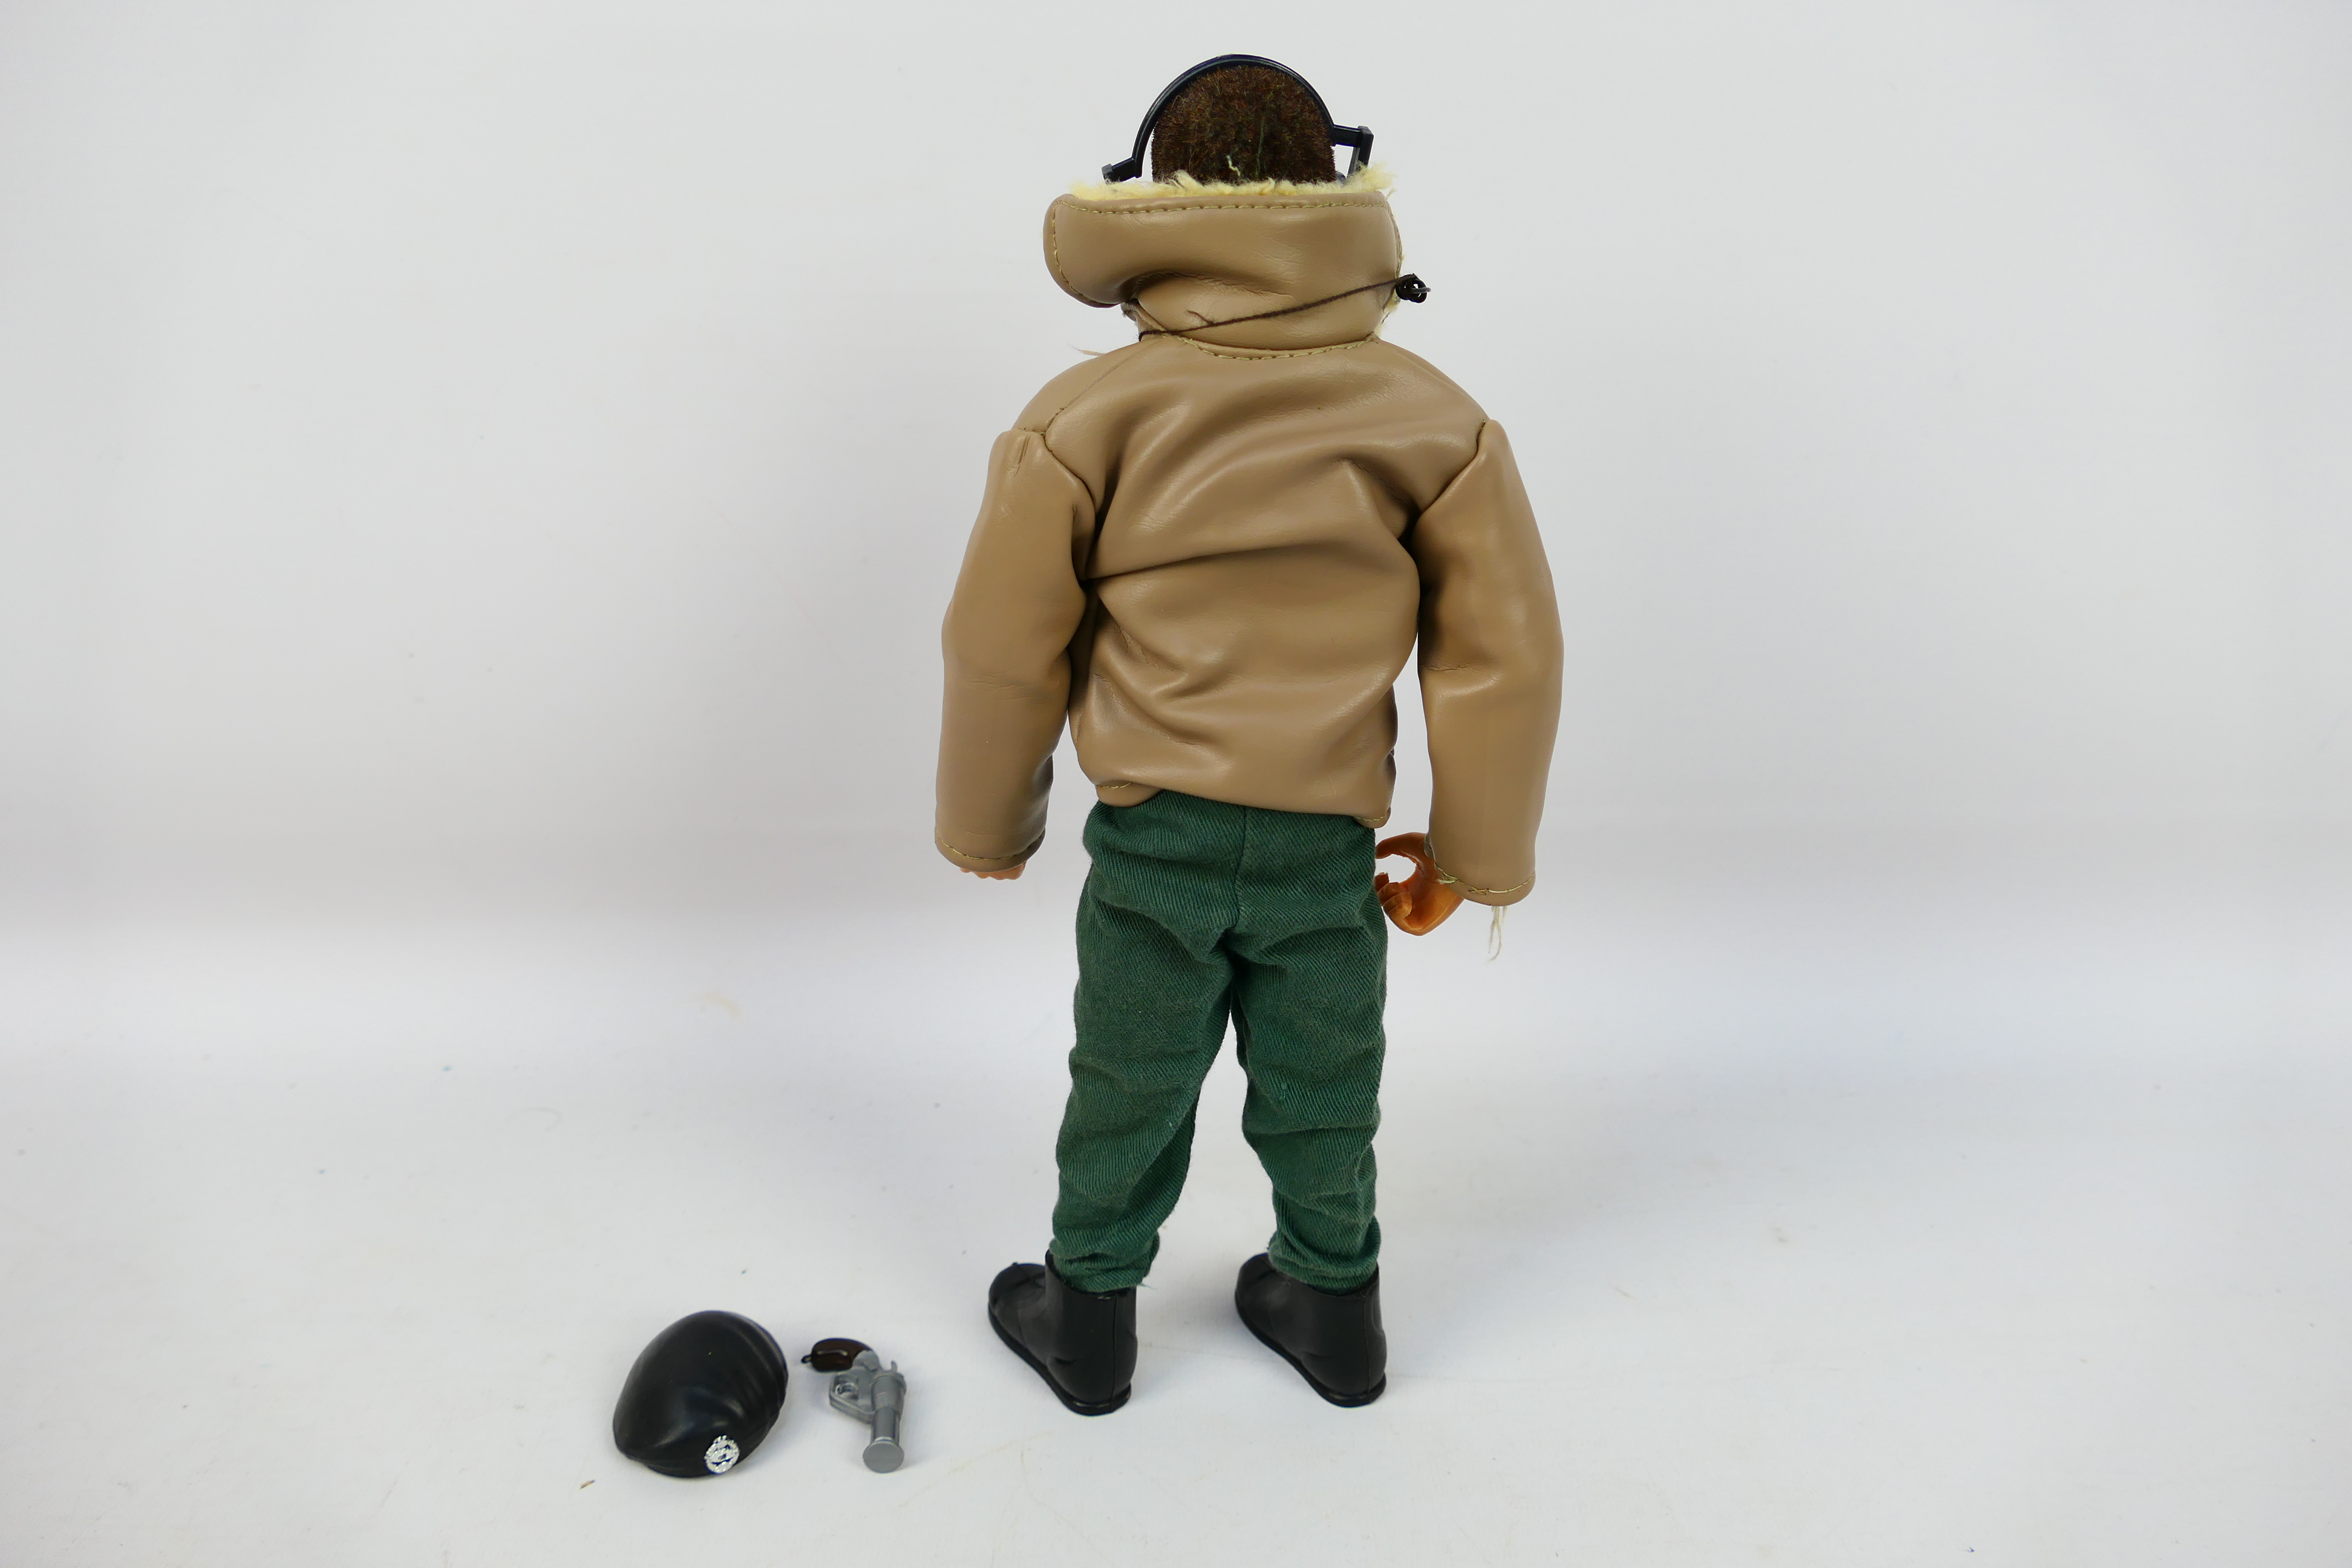 Palitoy - Action Man - A 1978 Action Man action figure with Flock hair and eagle eyes in a Tank - Image 3 of 8